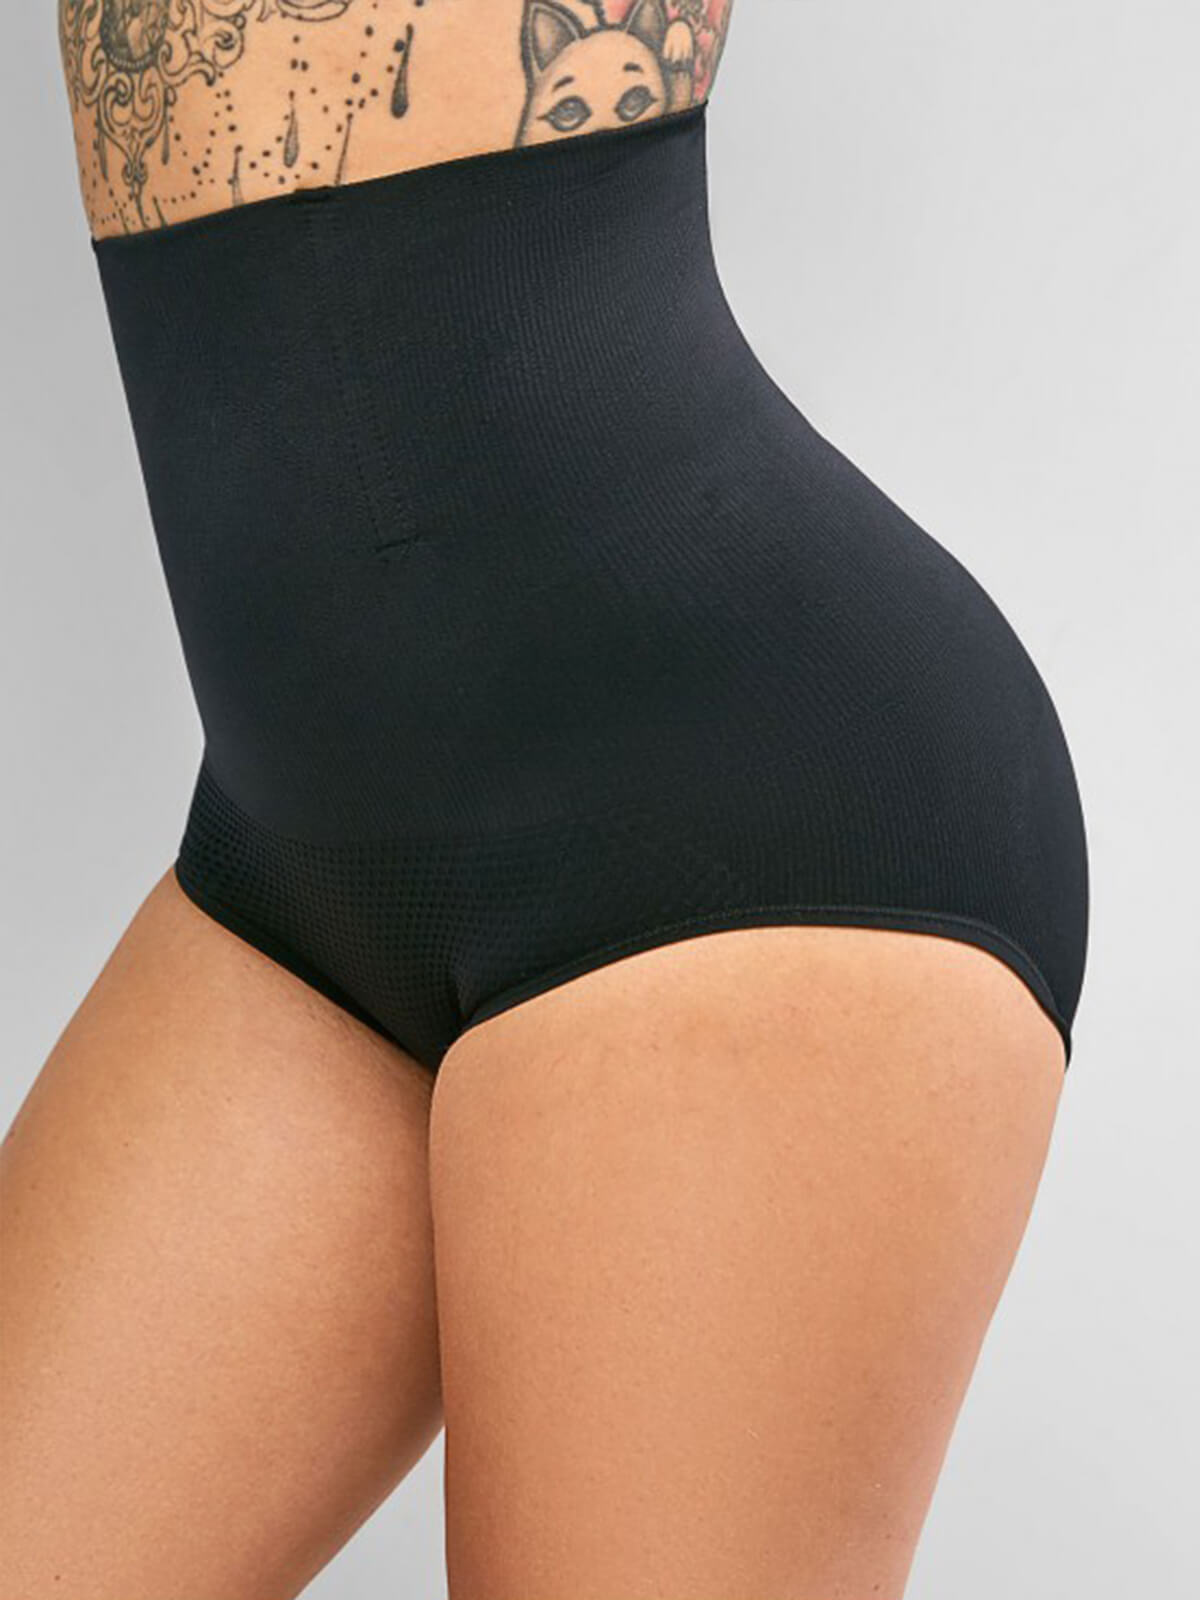 Every-day Tummy Control Panties (70% OFF TODAY ONLY!)